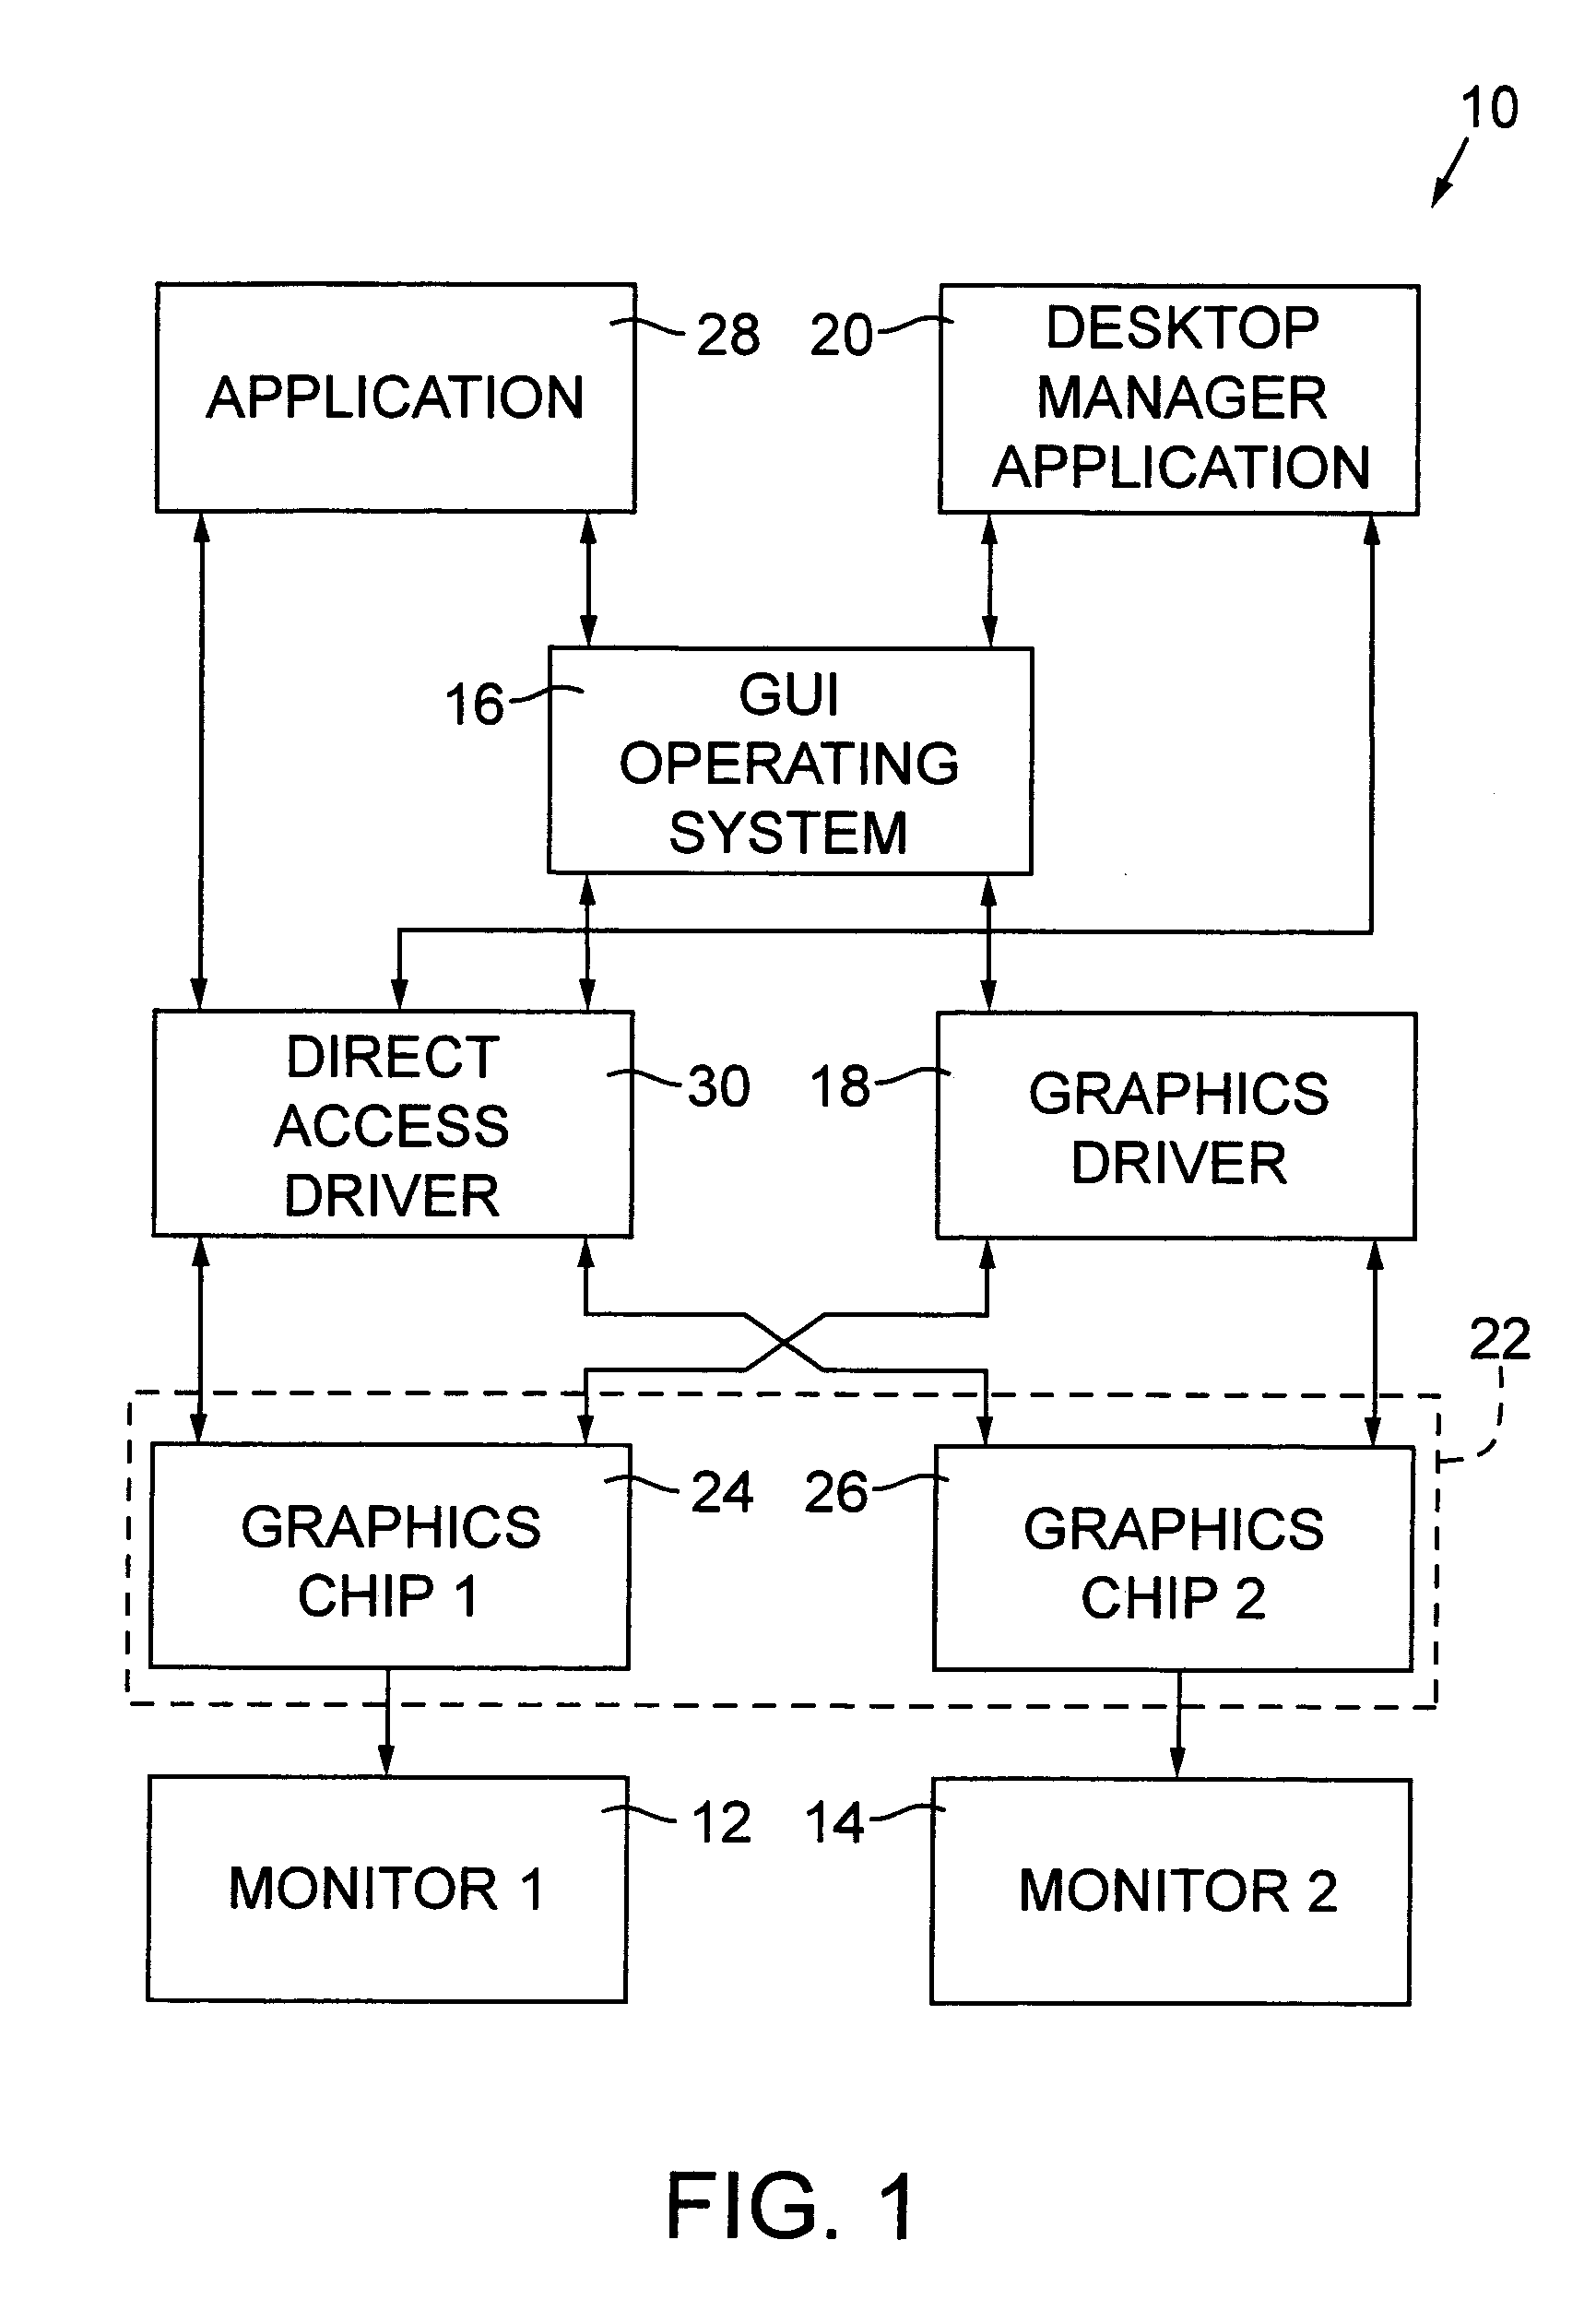 Method for displaying single monitor applications on multiple monitors driven by a personal computer